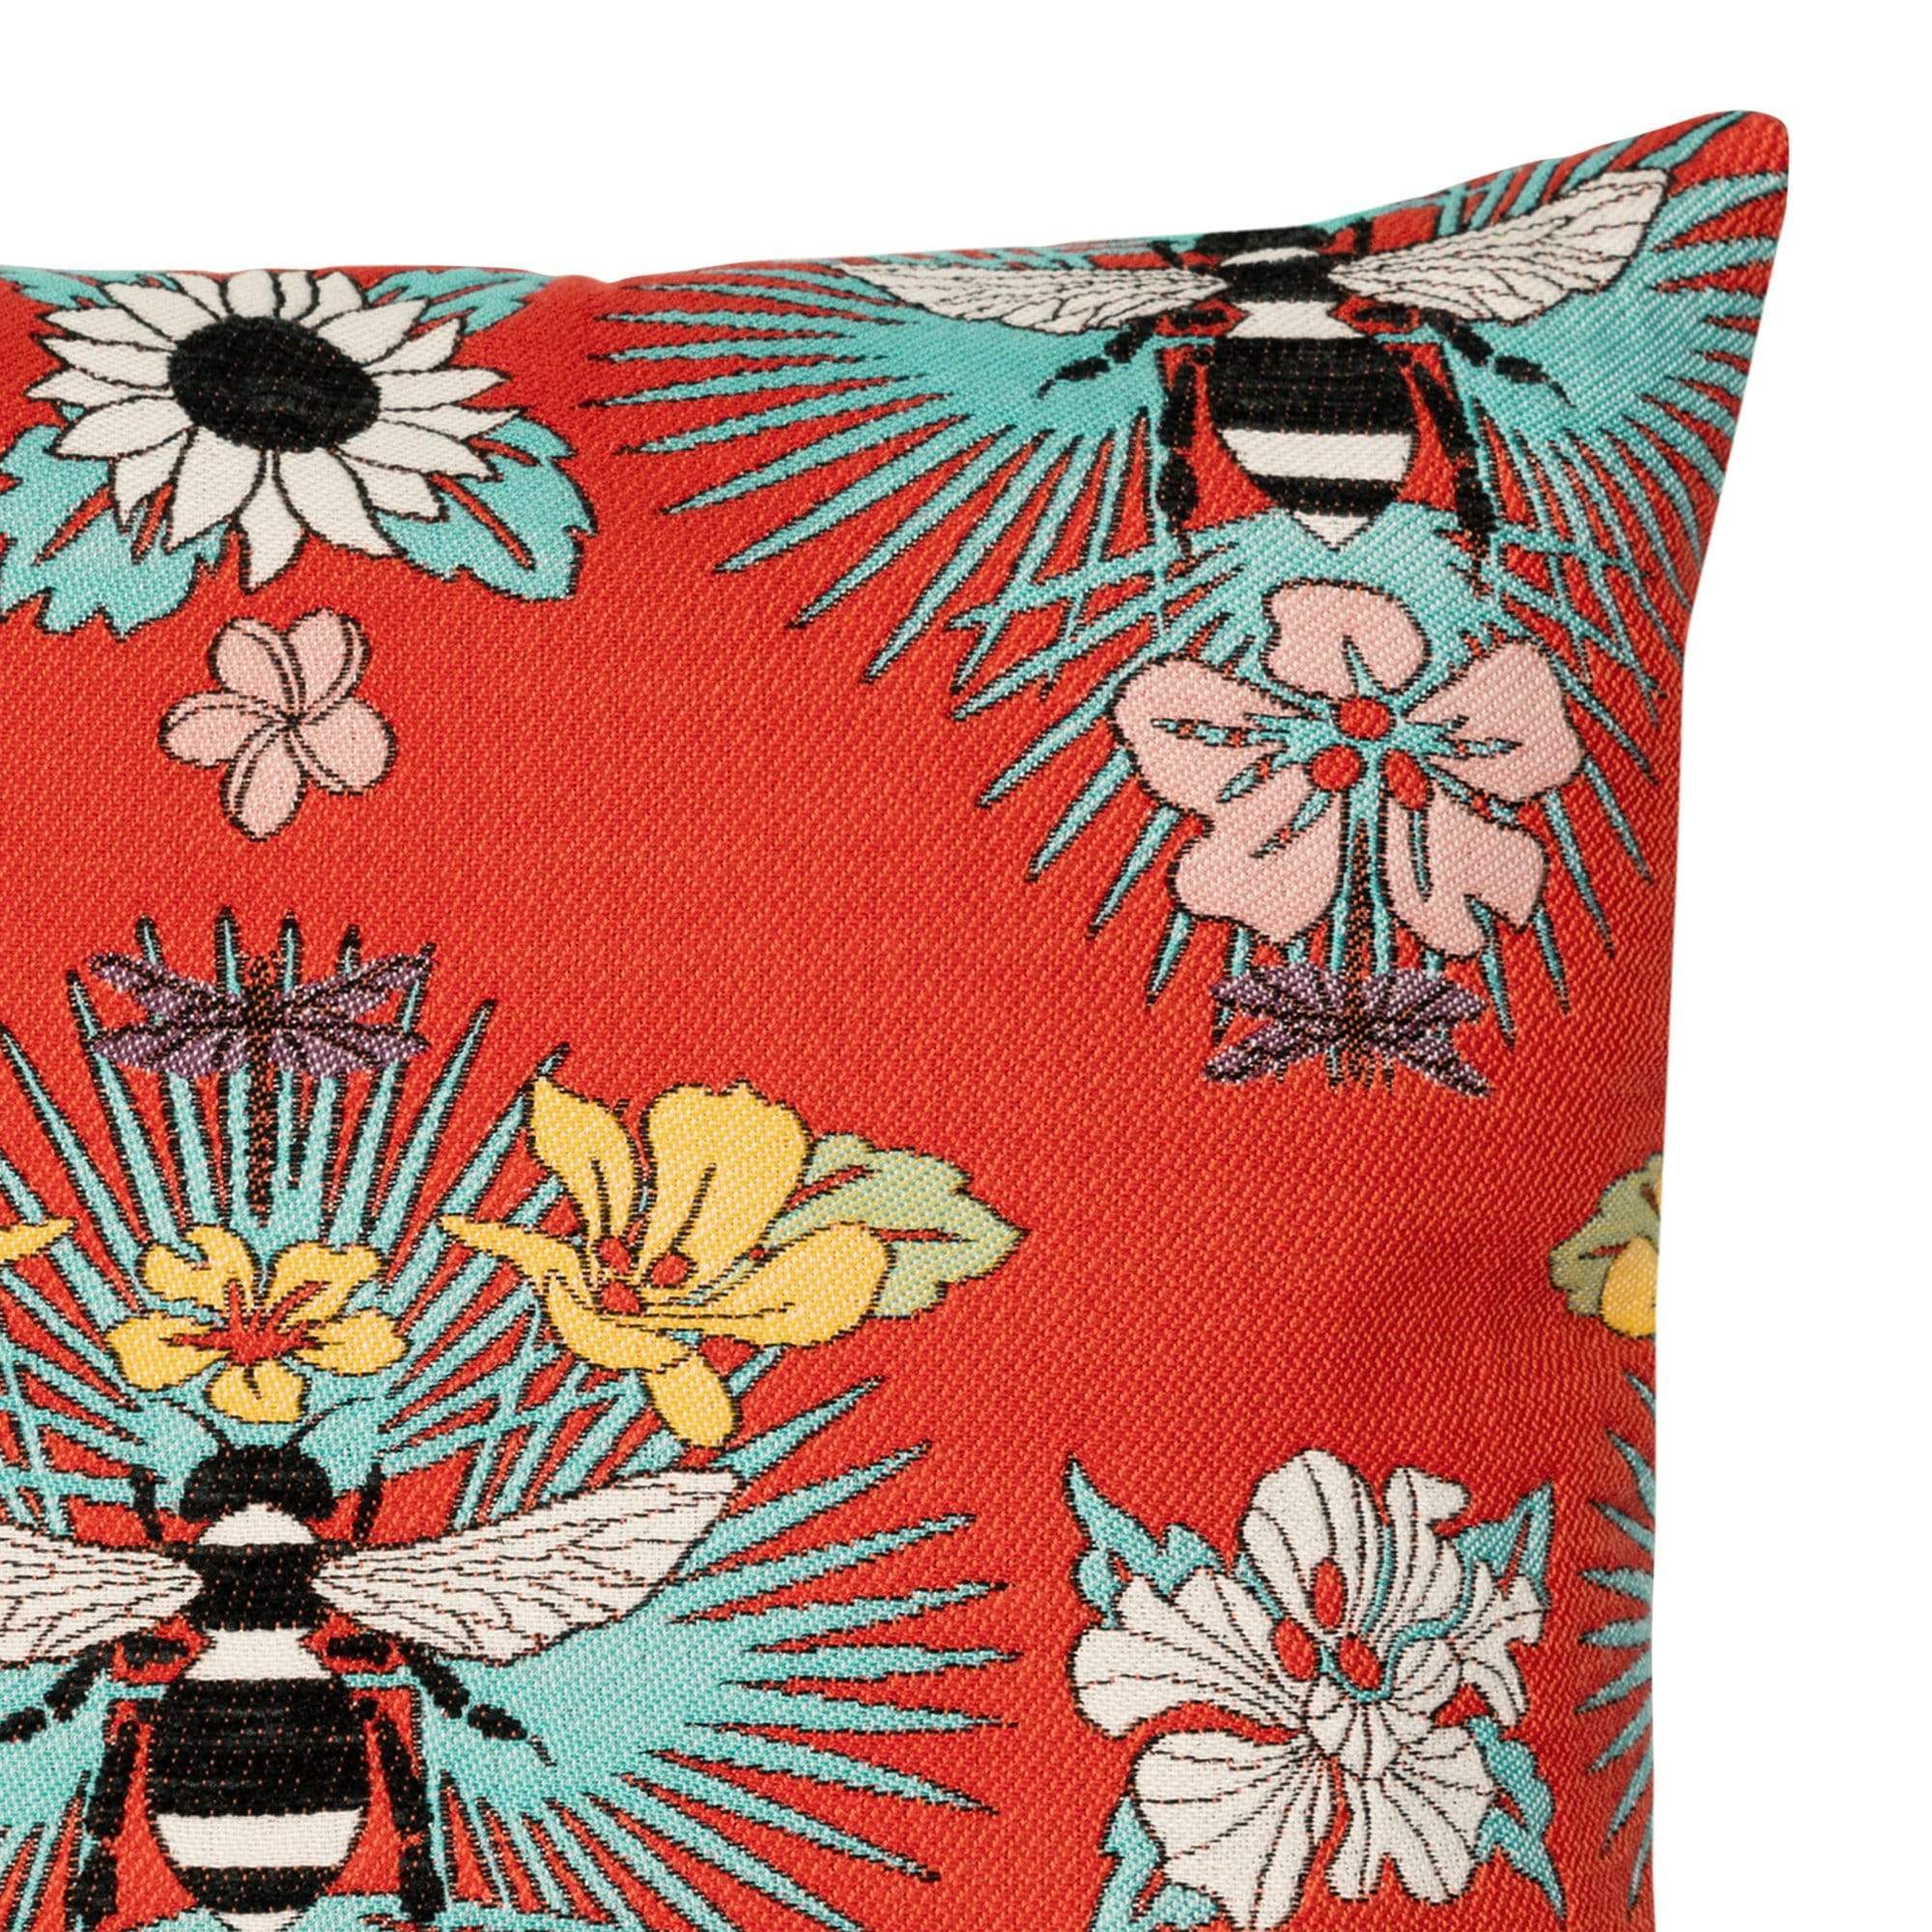 Bee Red Pillow